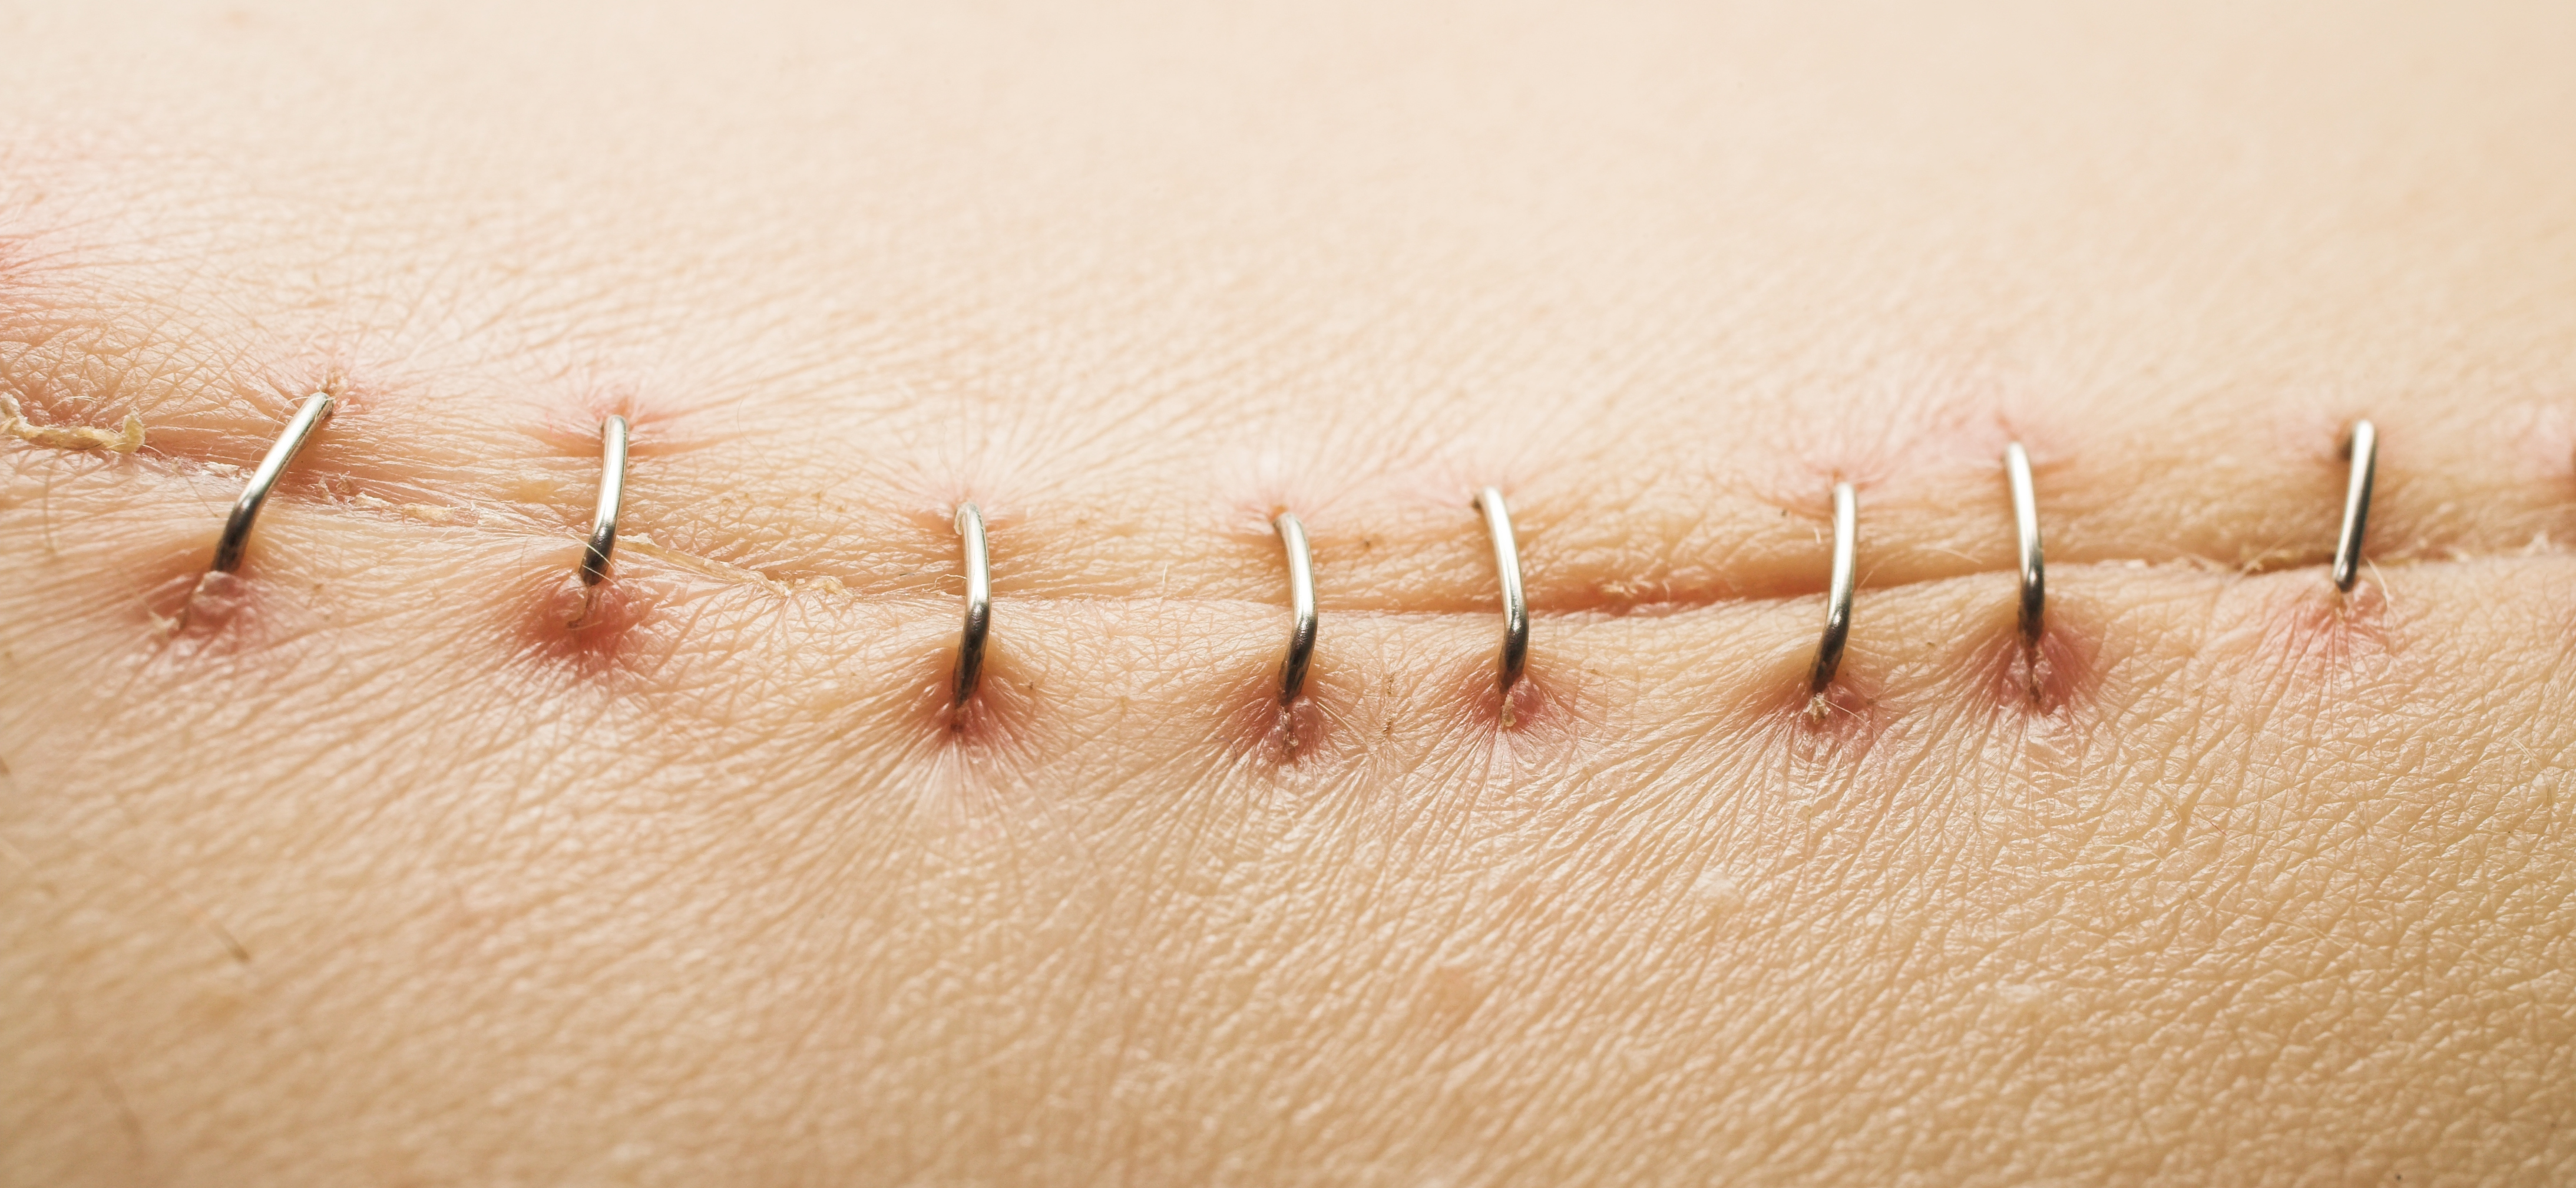 How Long Do Surgical Staples Stay In? | LIVESTRONG.COM